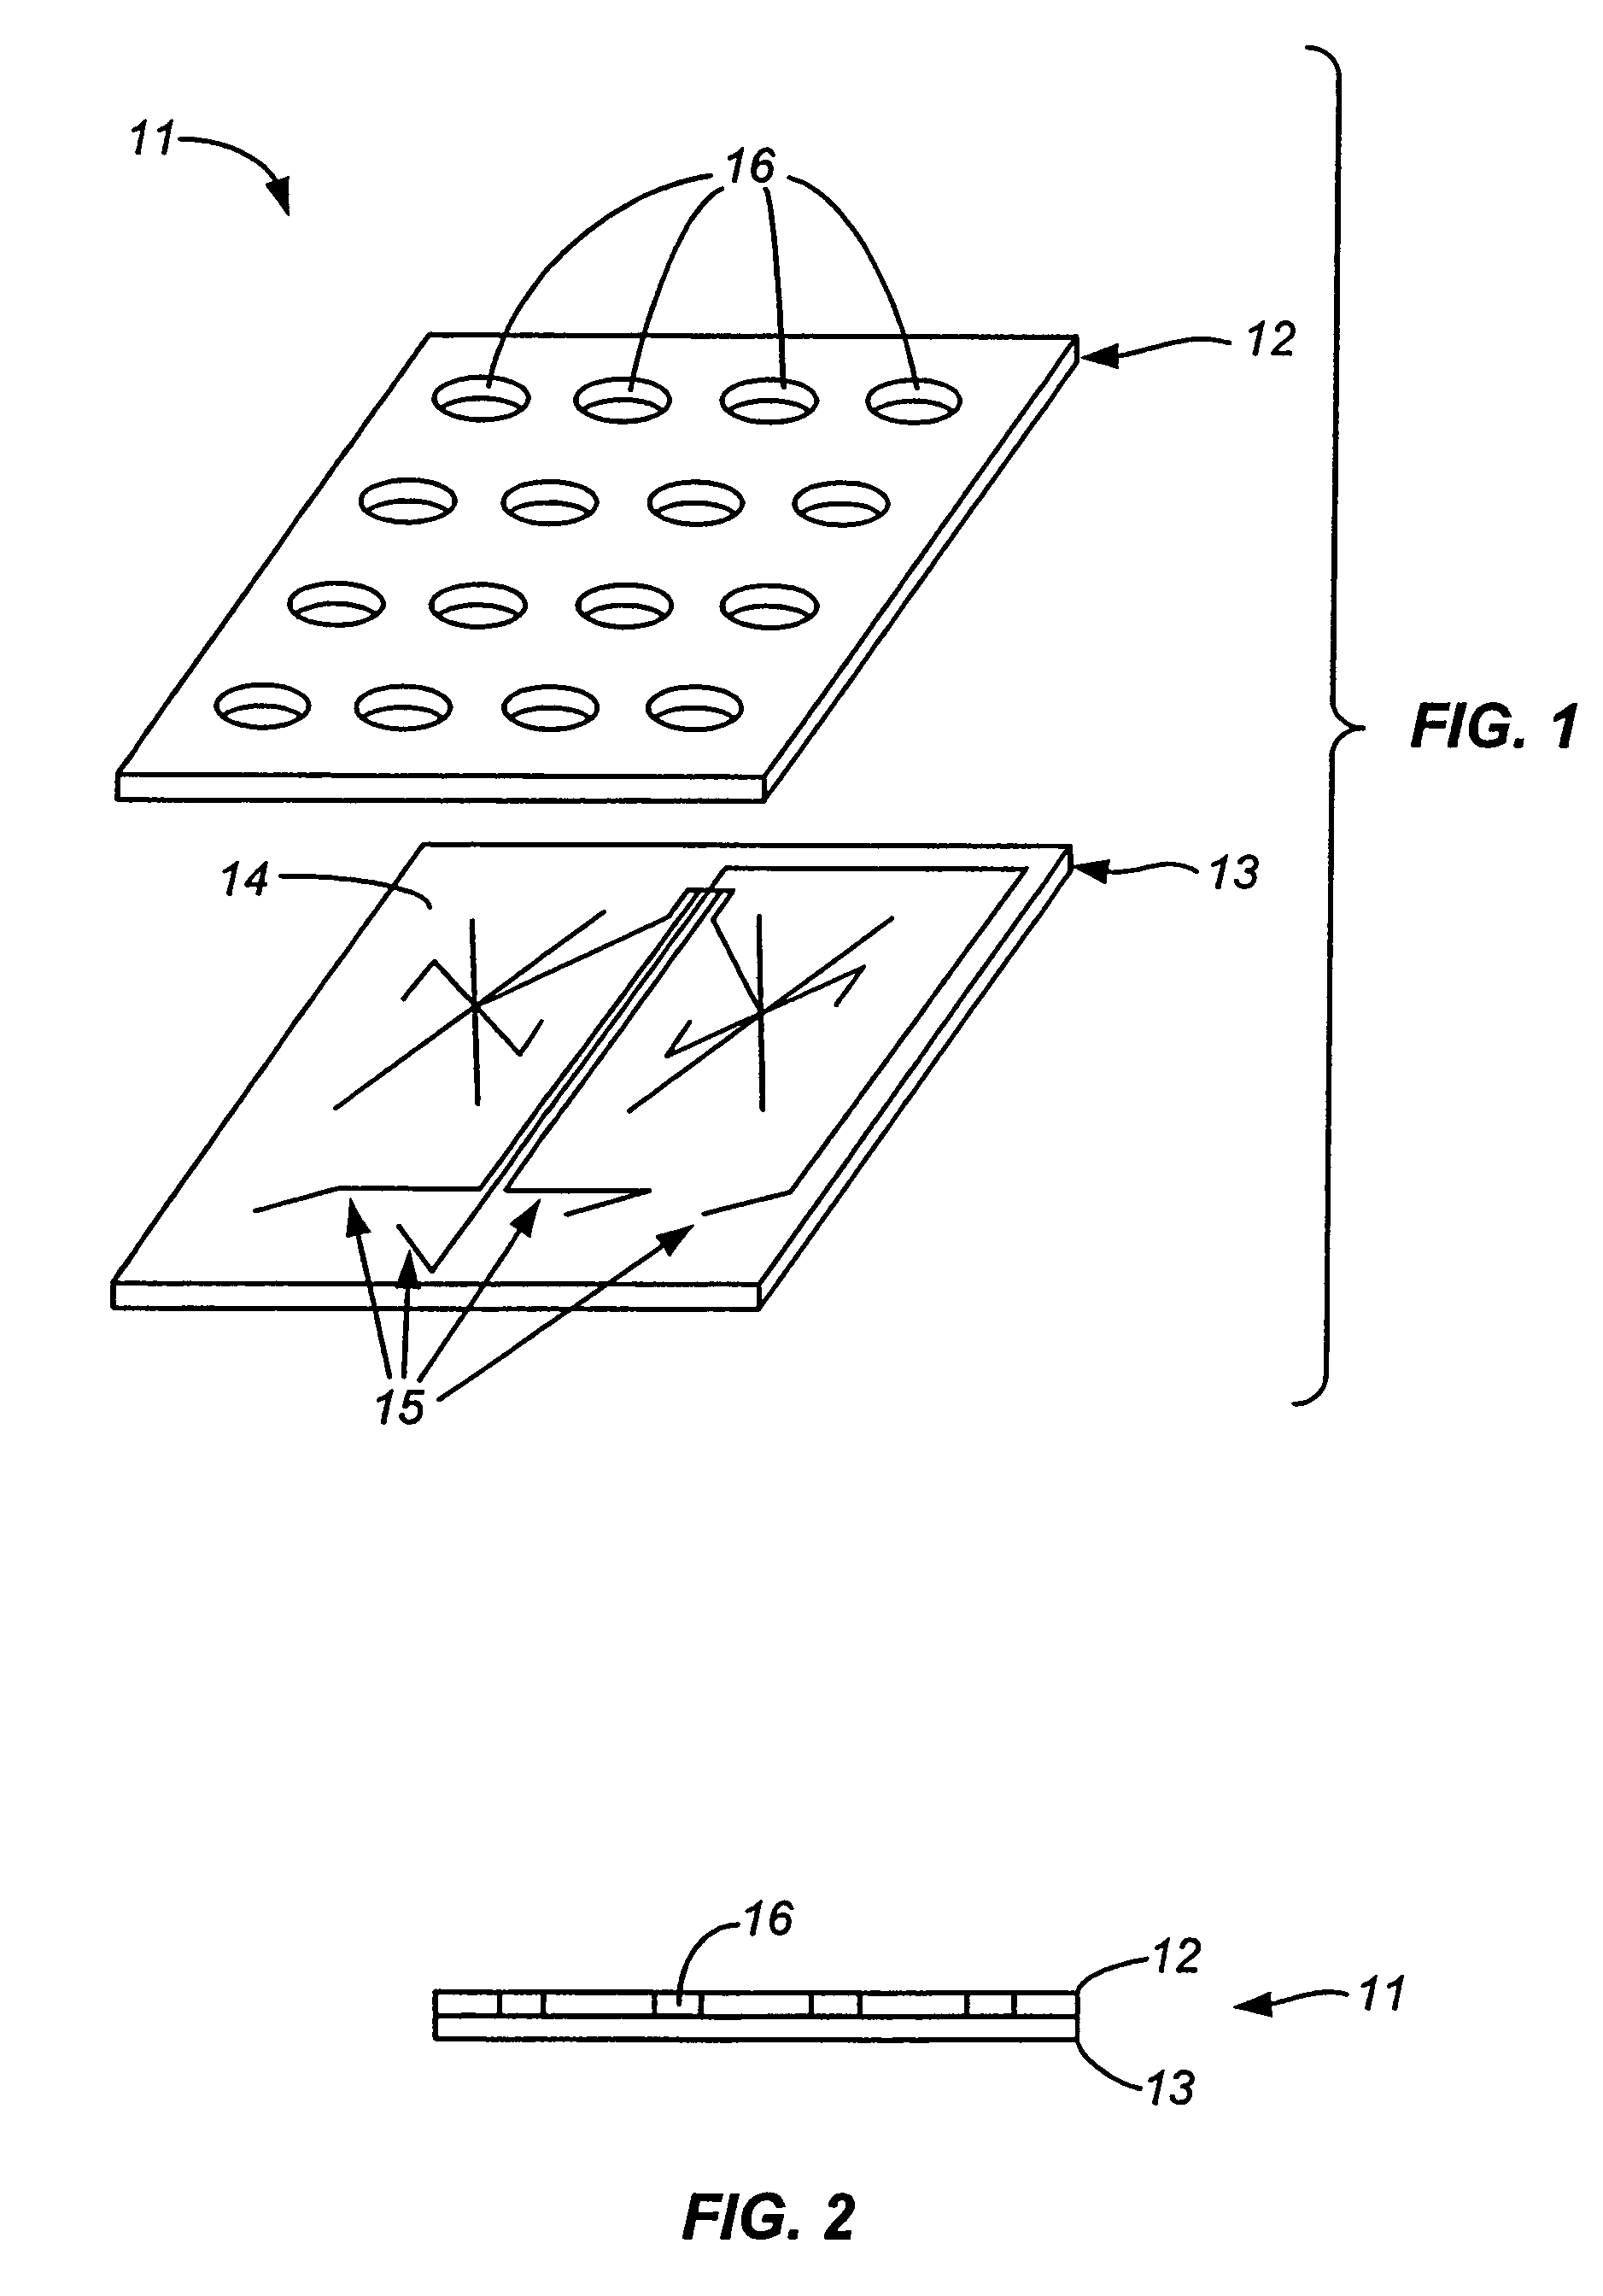 Apparatus for priming microfluidics devices with feedback control